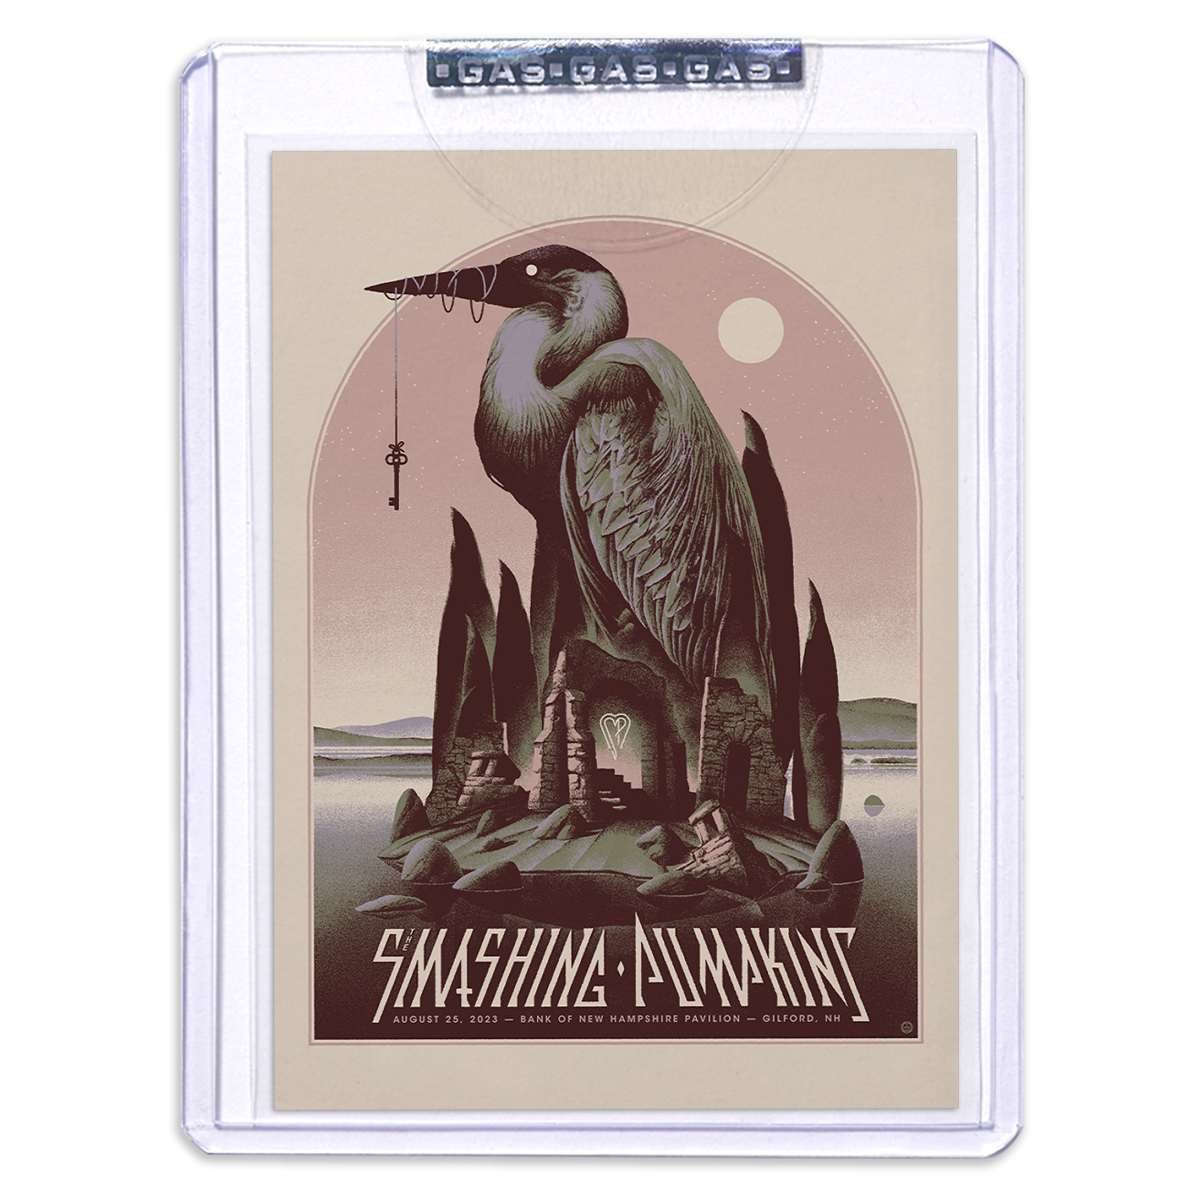 GAS The Smashing Pumpkins August 25, 2023, Gilford, NH Setlist Trading Card Illustrated by Max Löffler